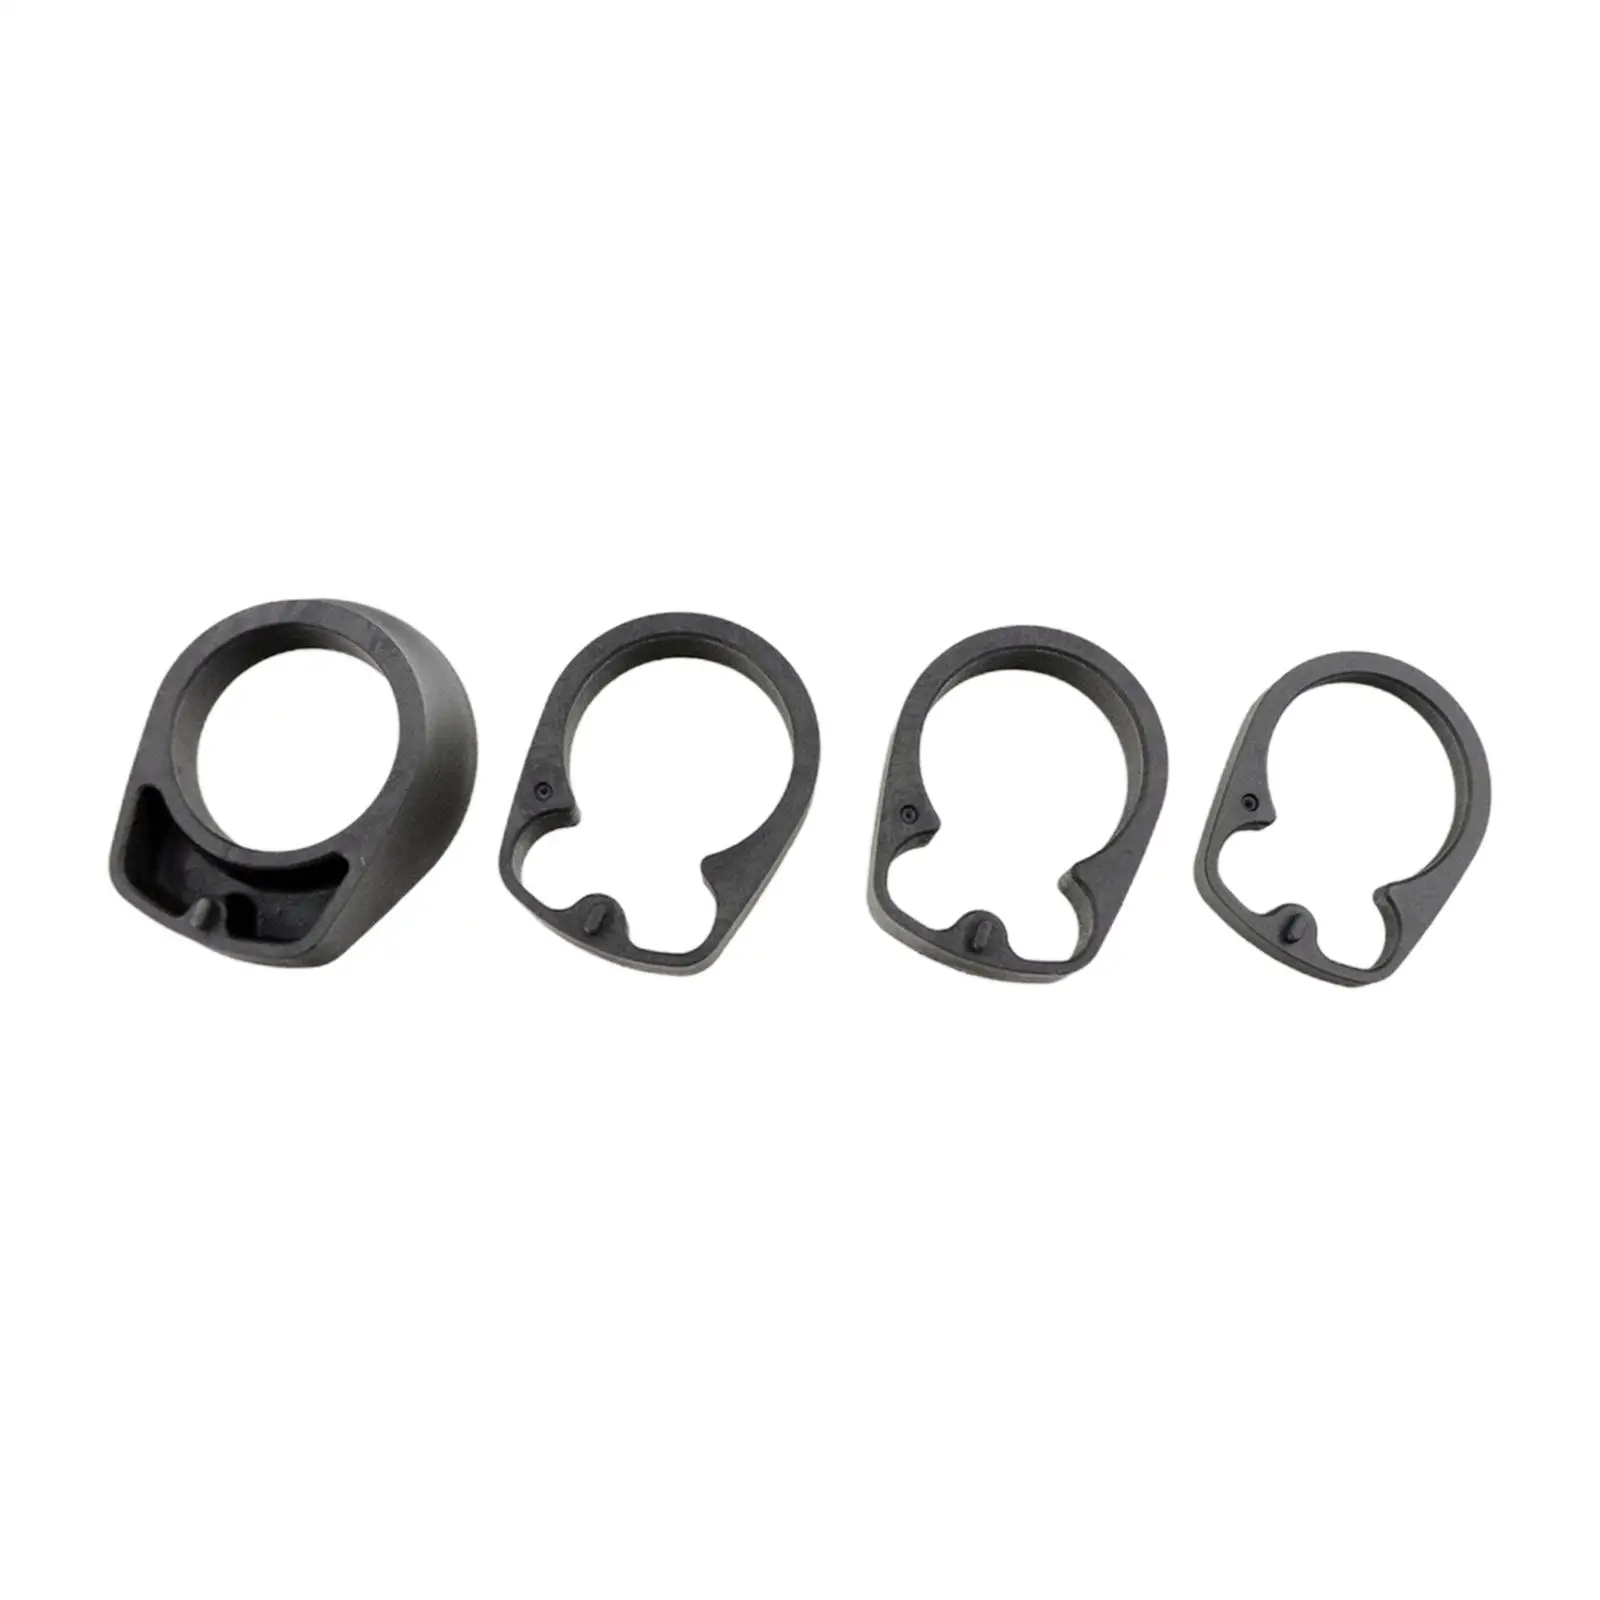 4Pcs Bike Curved Handlebar Spacer Headset Raise up for 28.6mm Front Stem Cycling